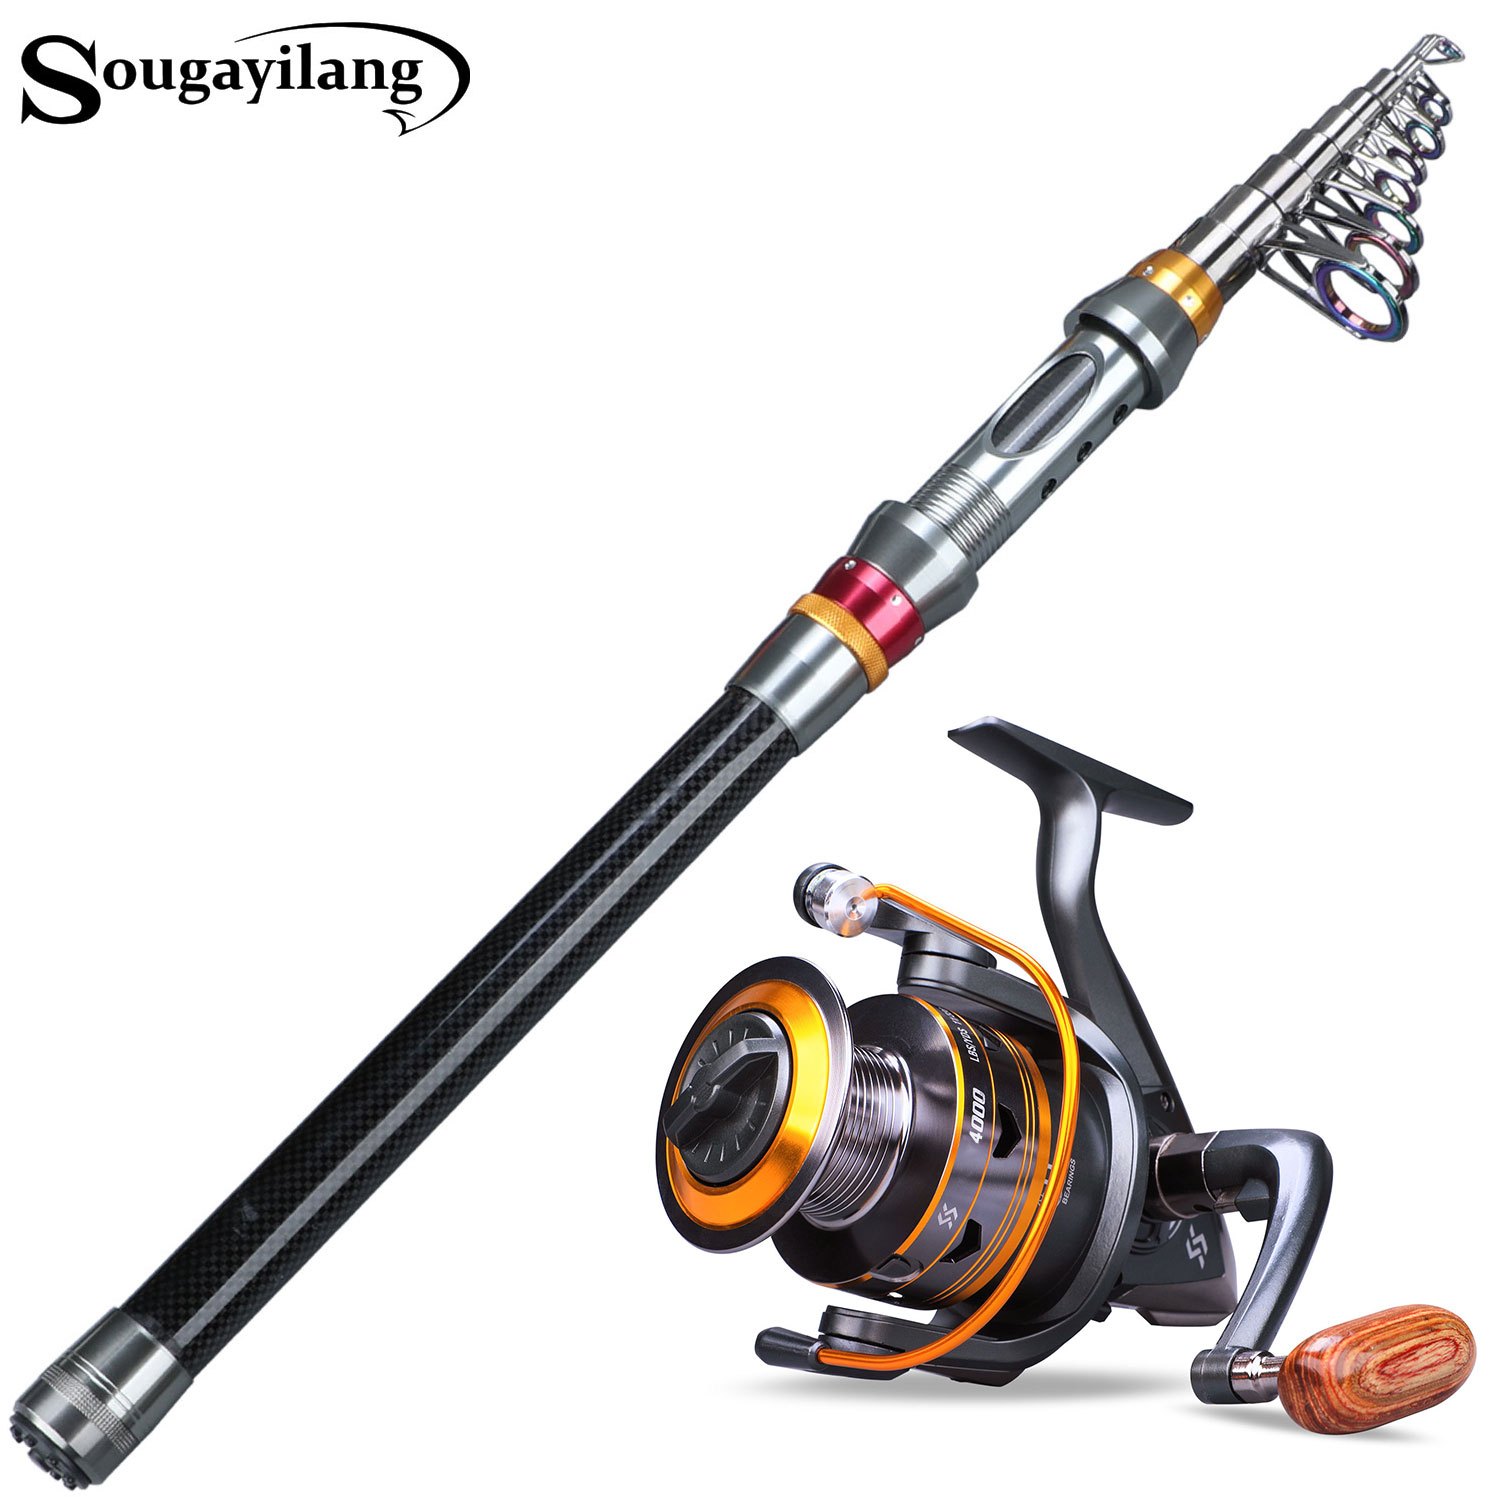 Sougayilang Spinning Telescopic Rod and Spinning Reel Fishing Combo for Travel, Size: 3.0m and 3000